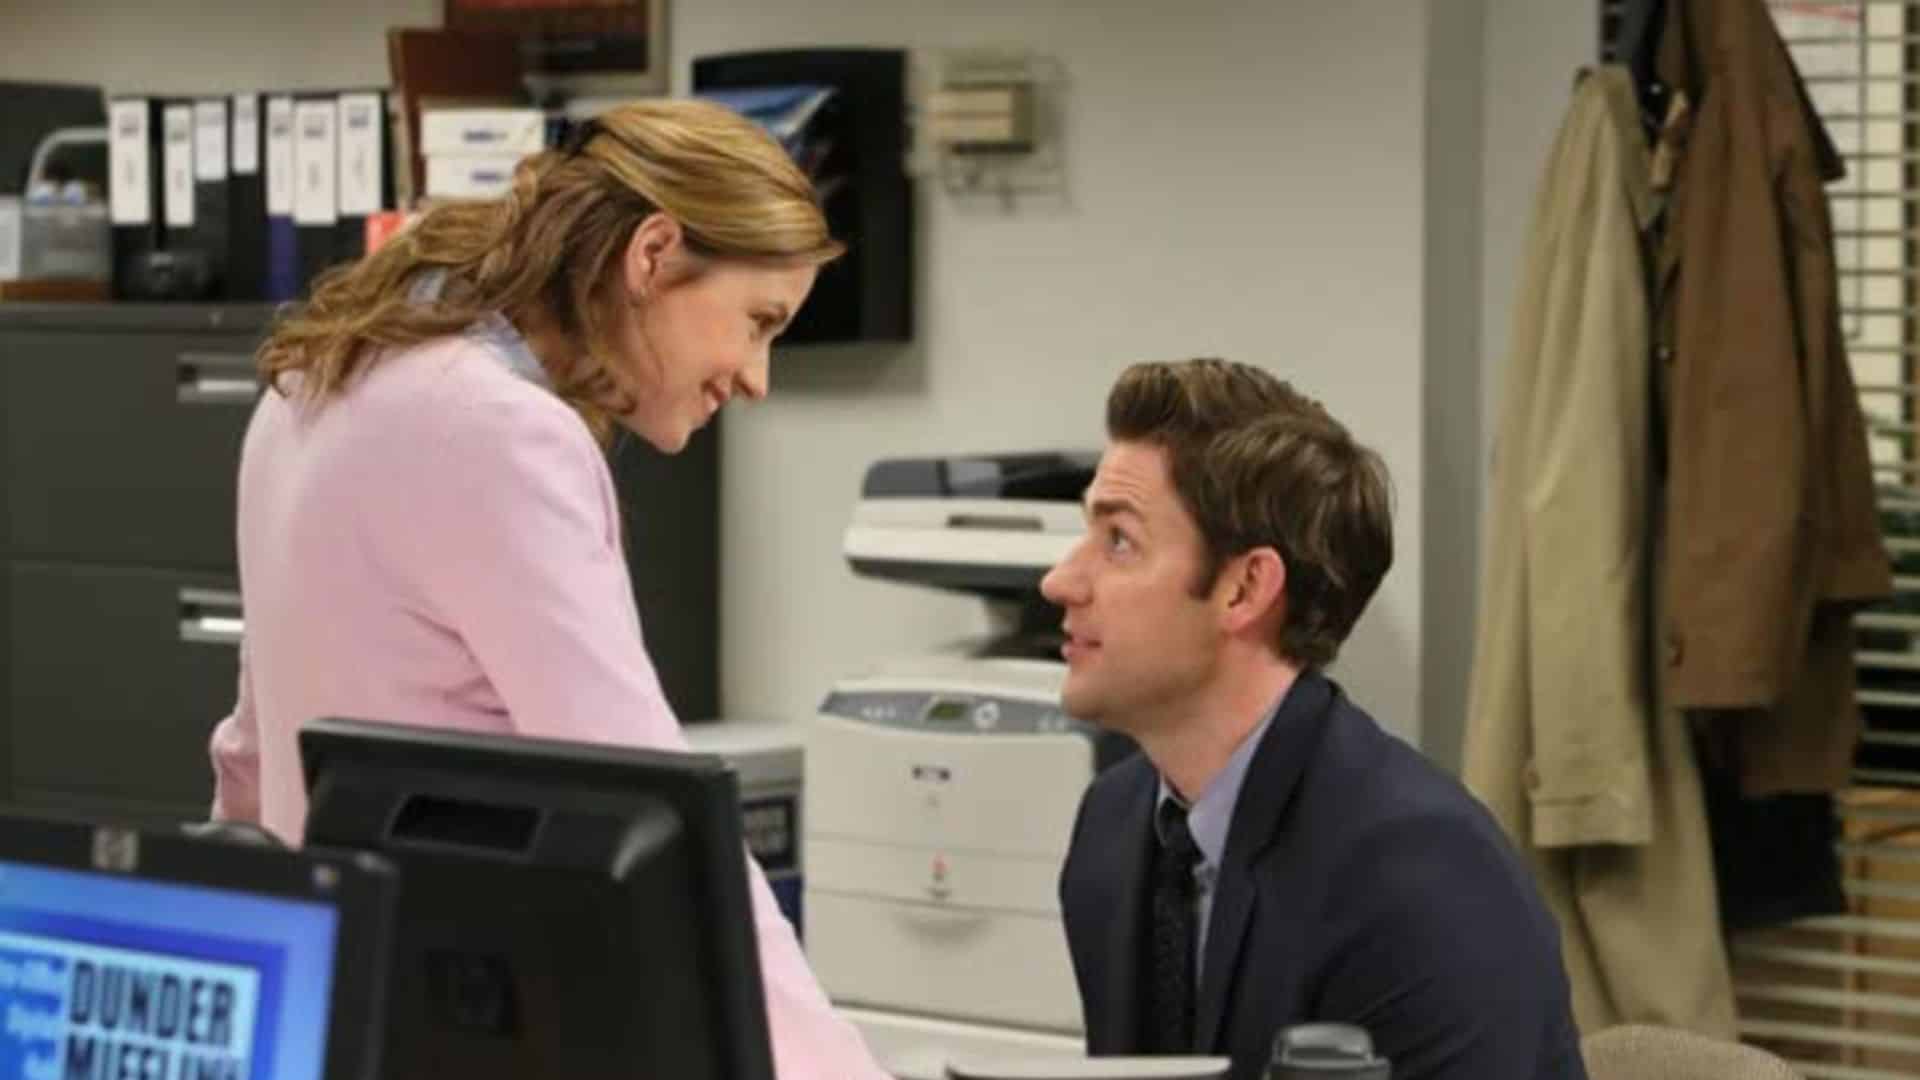 Pam and Jim talk at a desk in the office in this image from Peacock